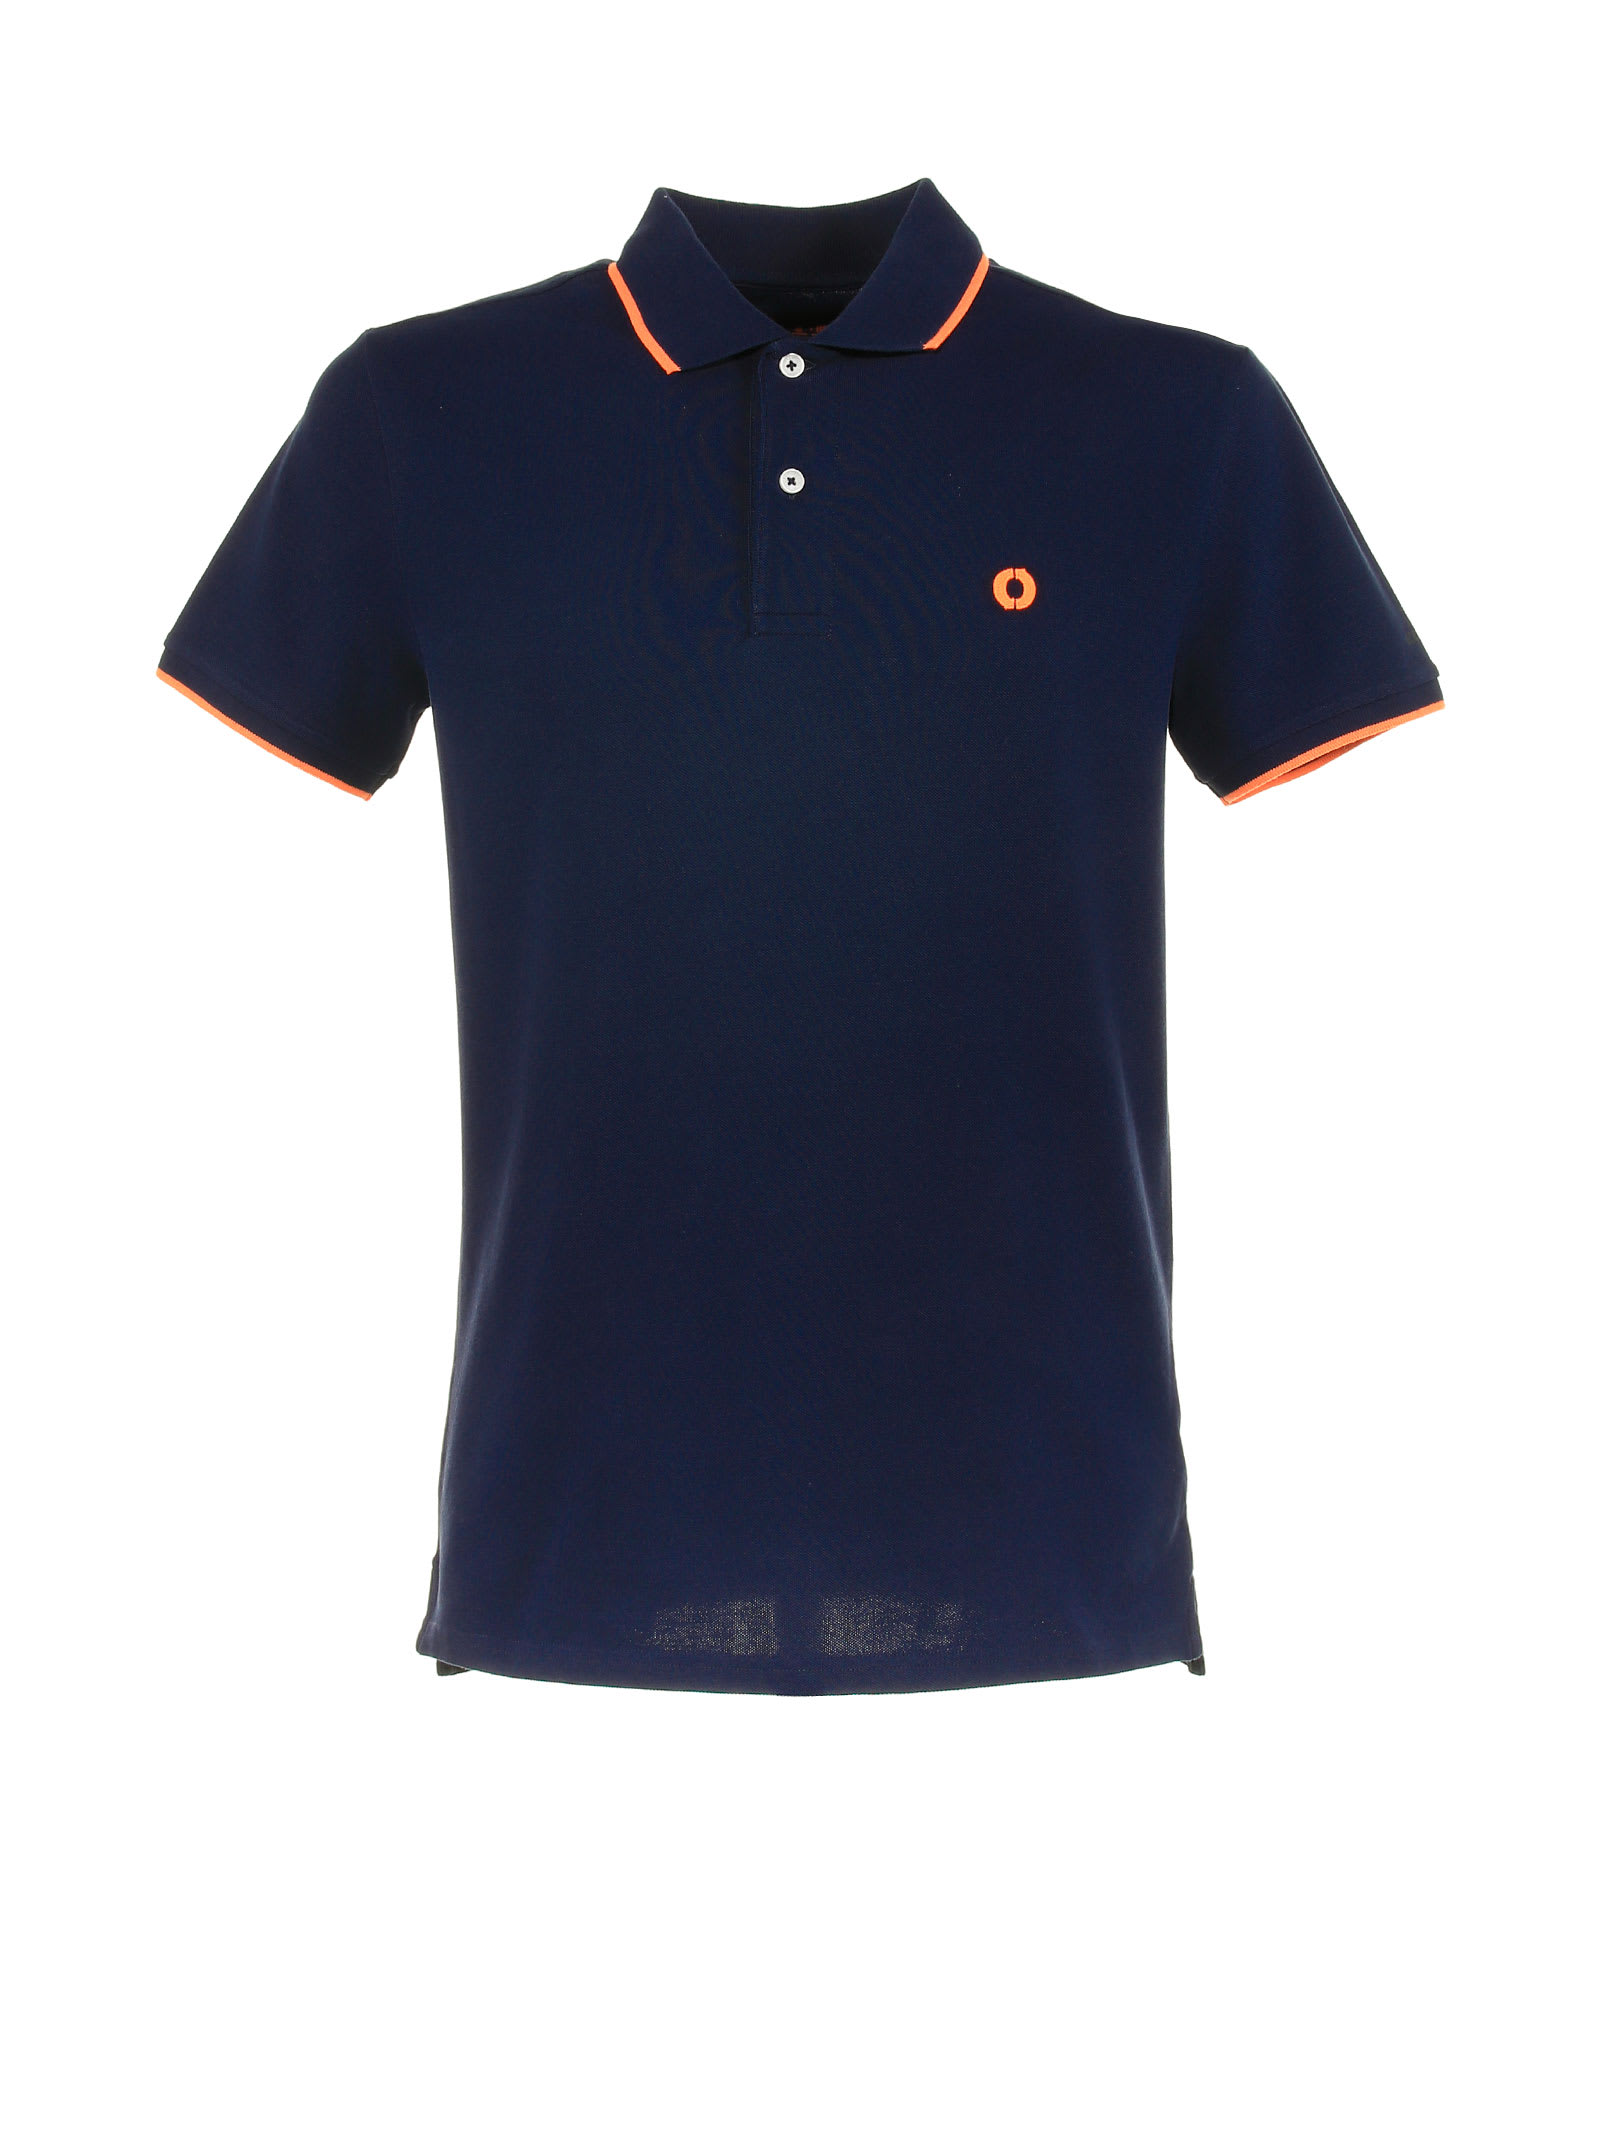 Ecoalf Polo Shirt With Contrasting Details